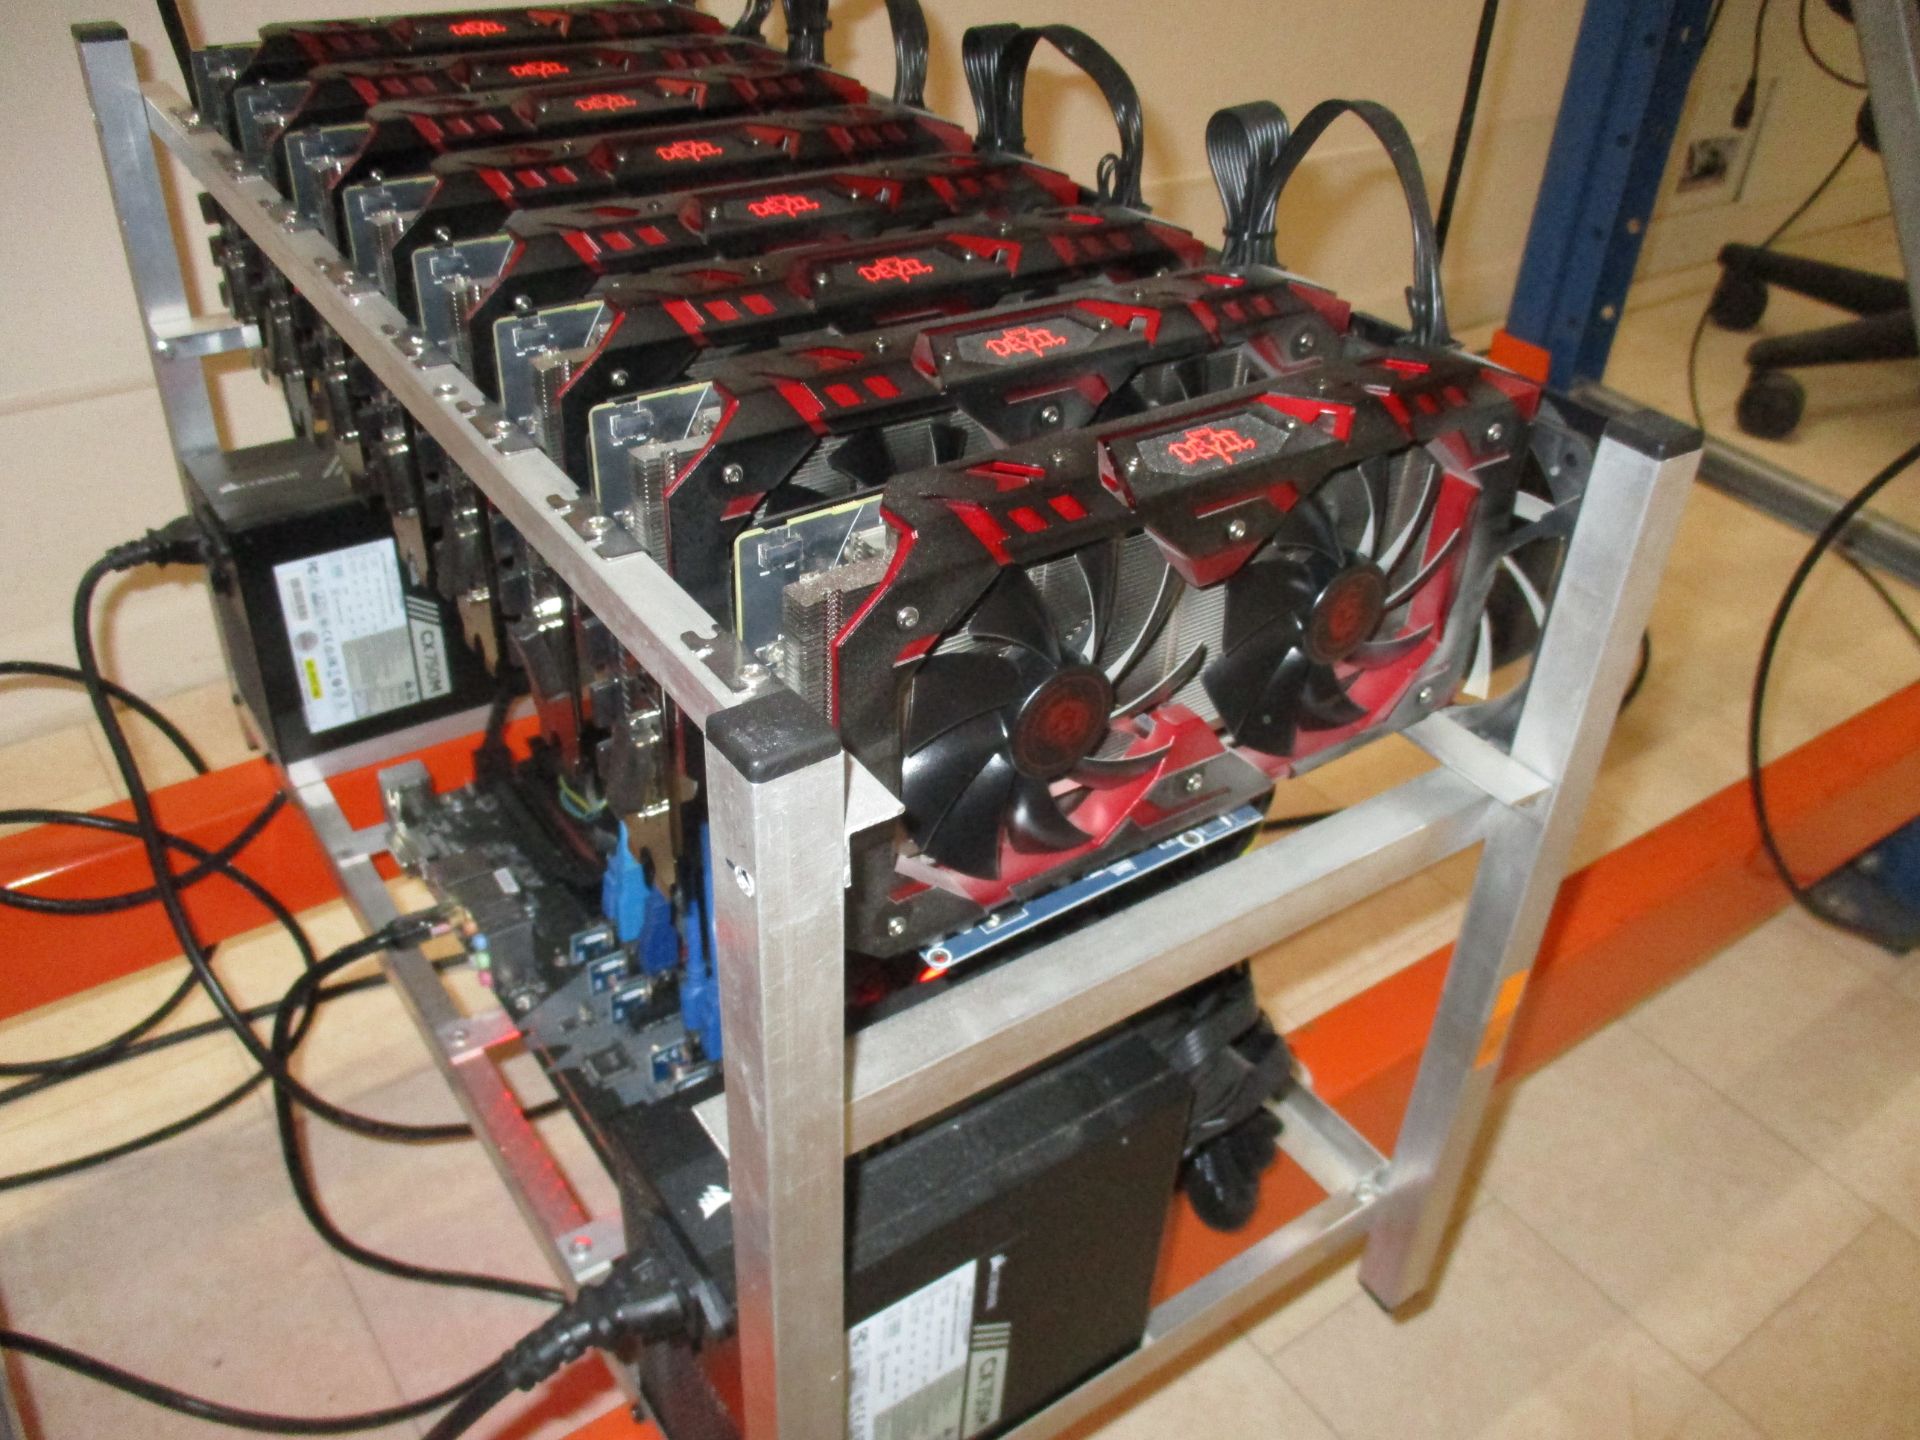 1 x Bit Coin/Crypto Currency Mining Rig With 8 x AMD RX 580 Red Devil 8 GB Graphics Cards